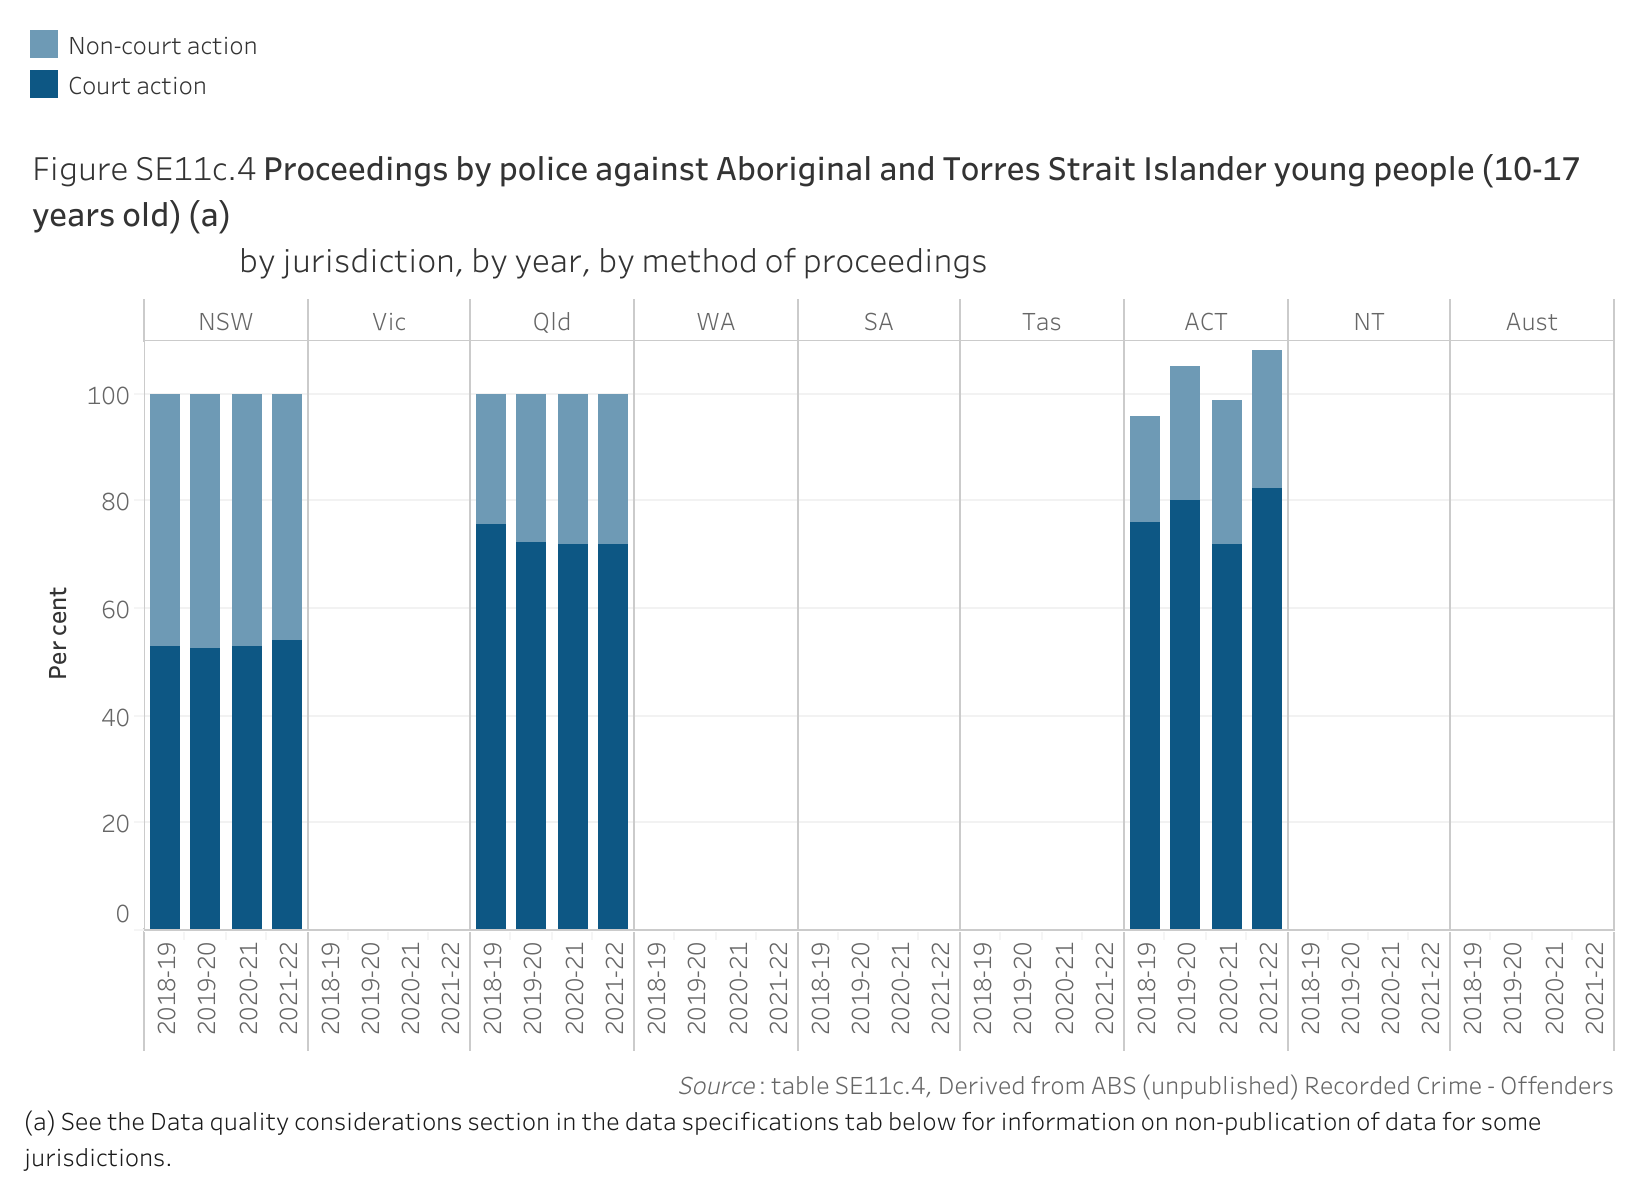 Figure SE11c.4 shows proceedings by police against Aboriginal and Torres Strait Islander young people (10-17 years old), by jurisdiction, by year, by method of proceedings. More details can be found within the text near this image.